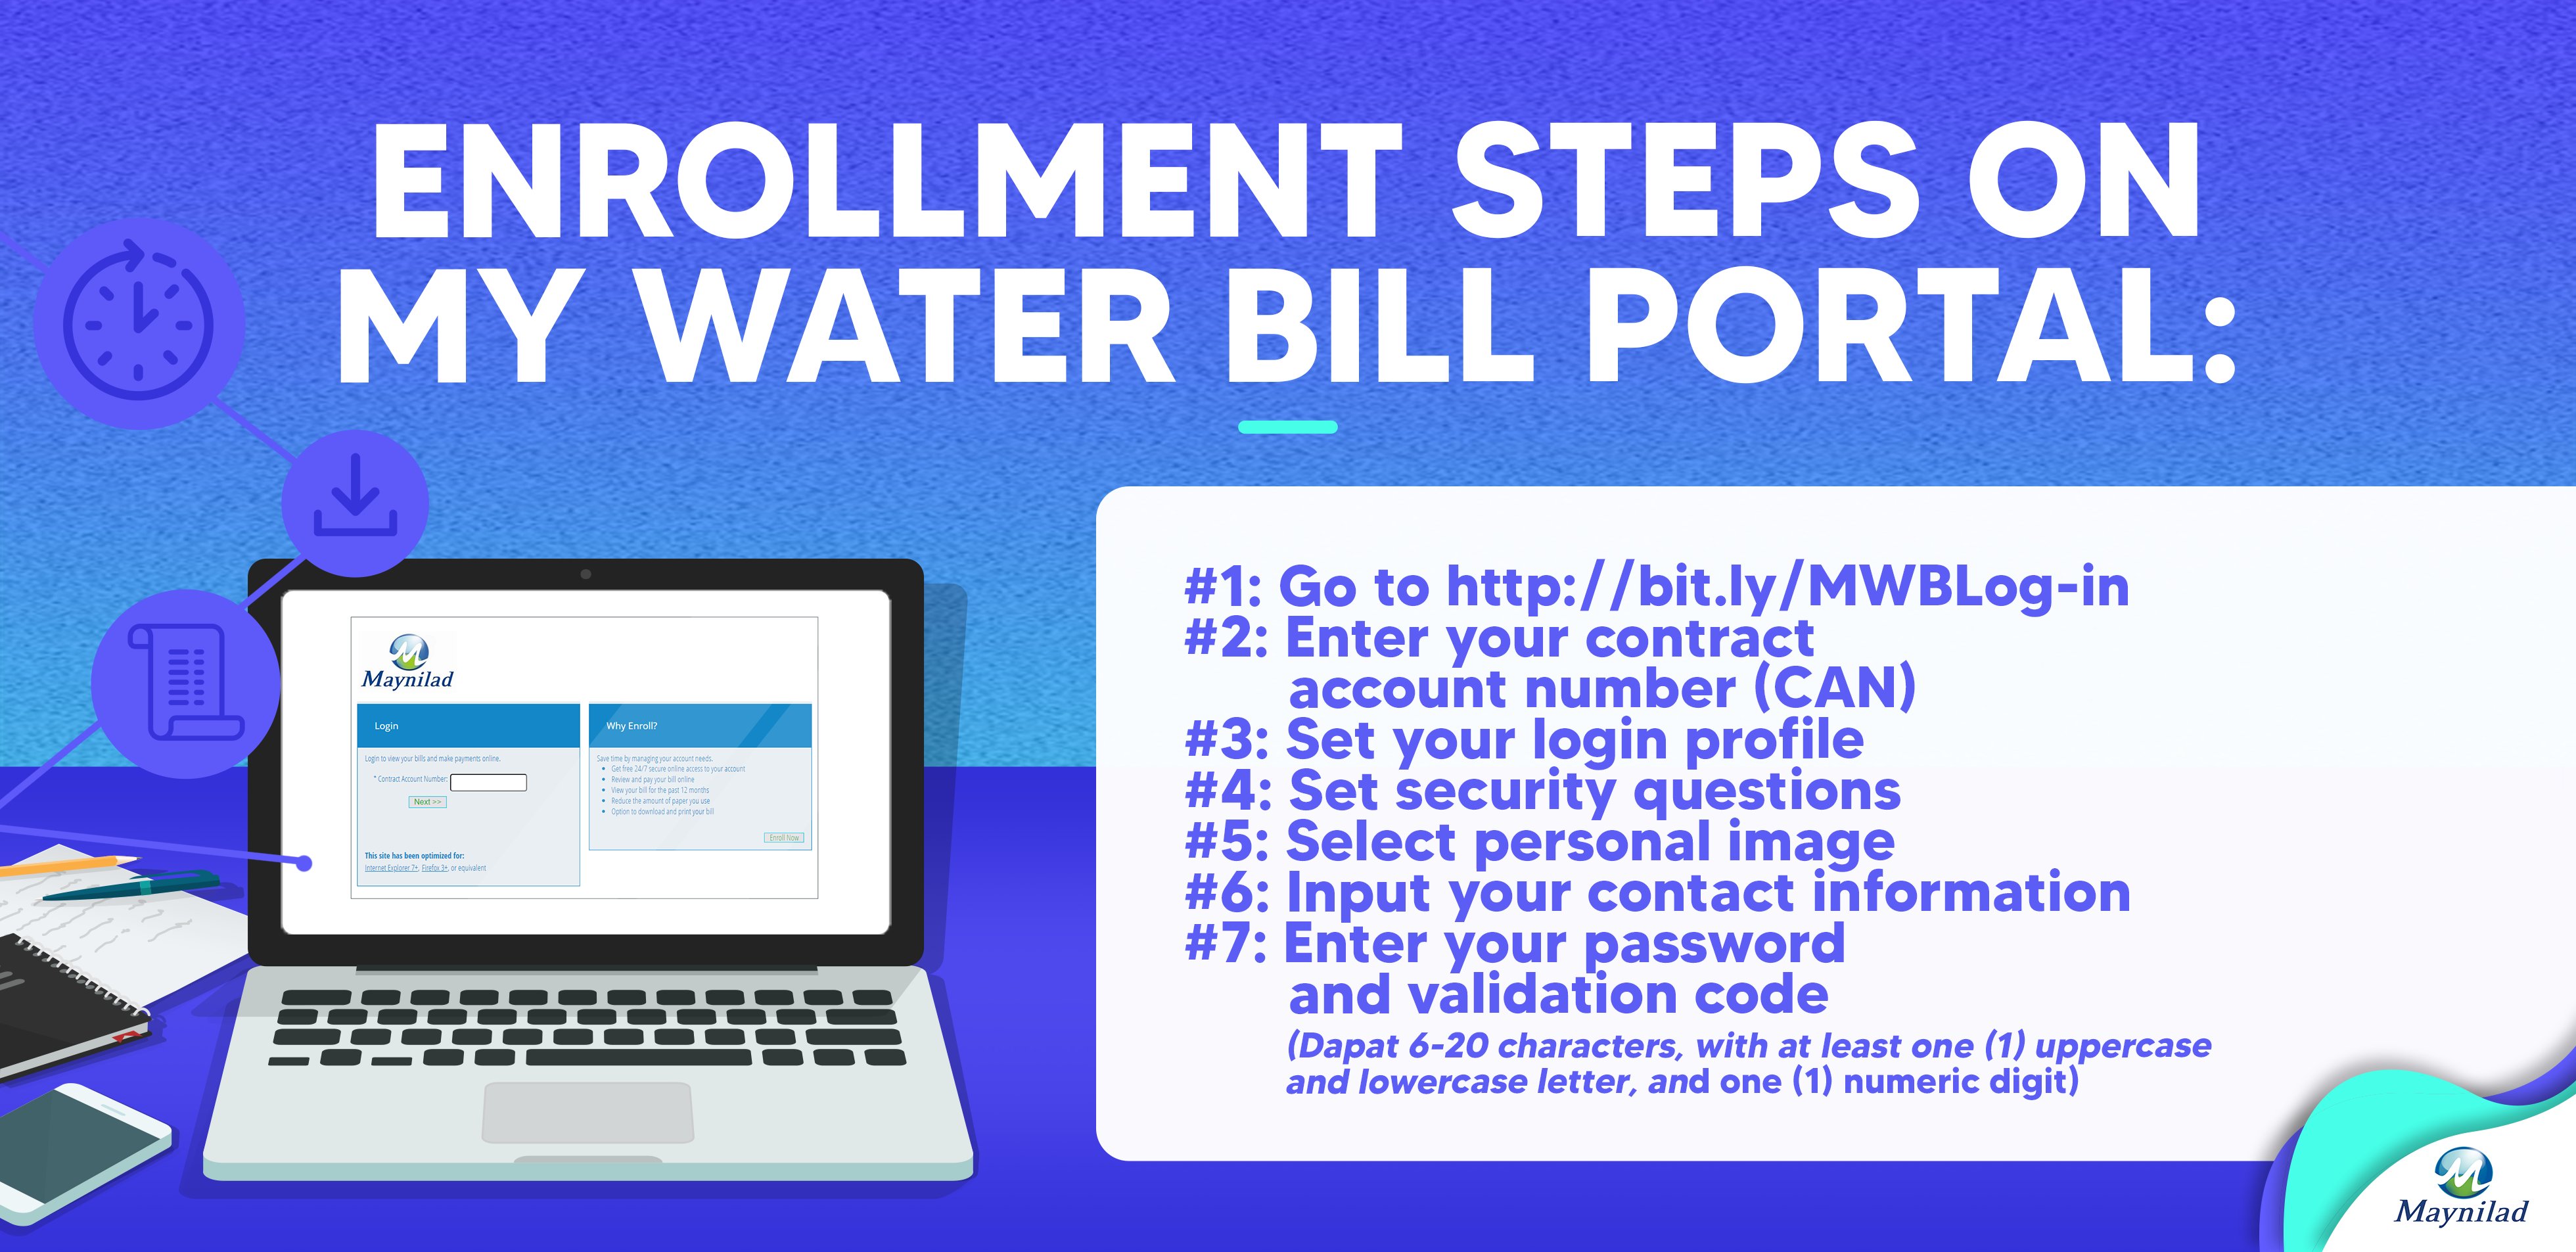 How To Enroll on Maynilad My Water Bill Portal